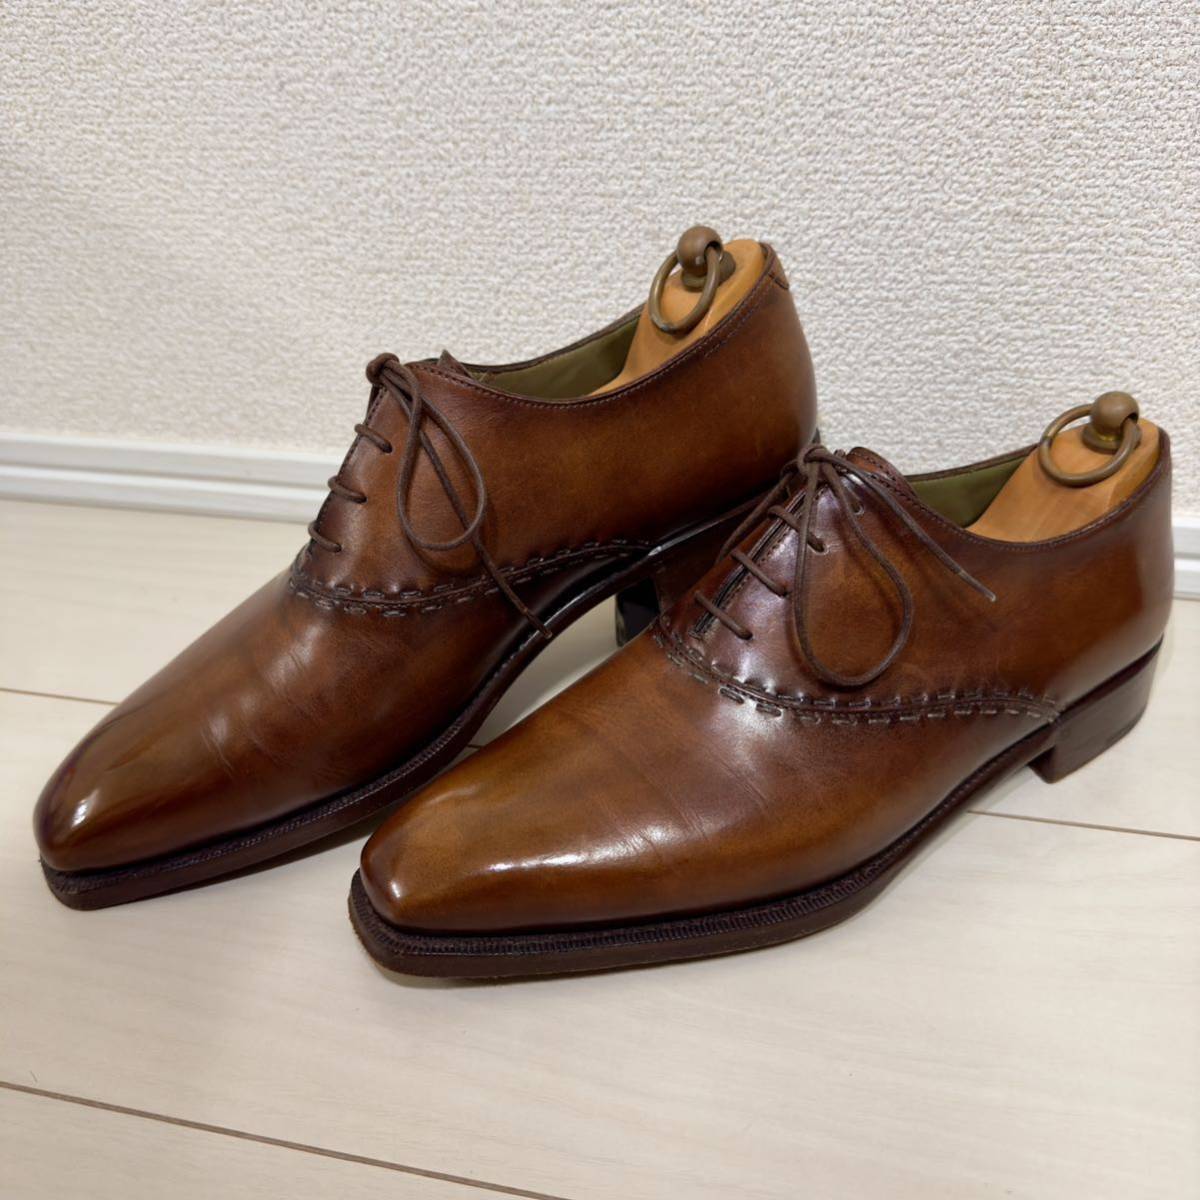  rare regular price 33.7 ten thousand jpy Berluti Goodyear made law pa tea n leather stitch business shoes 7.5 leather shoes ma dam oruga period Brown genuine article tea 